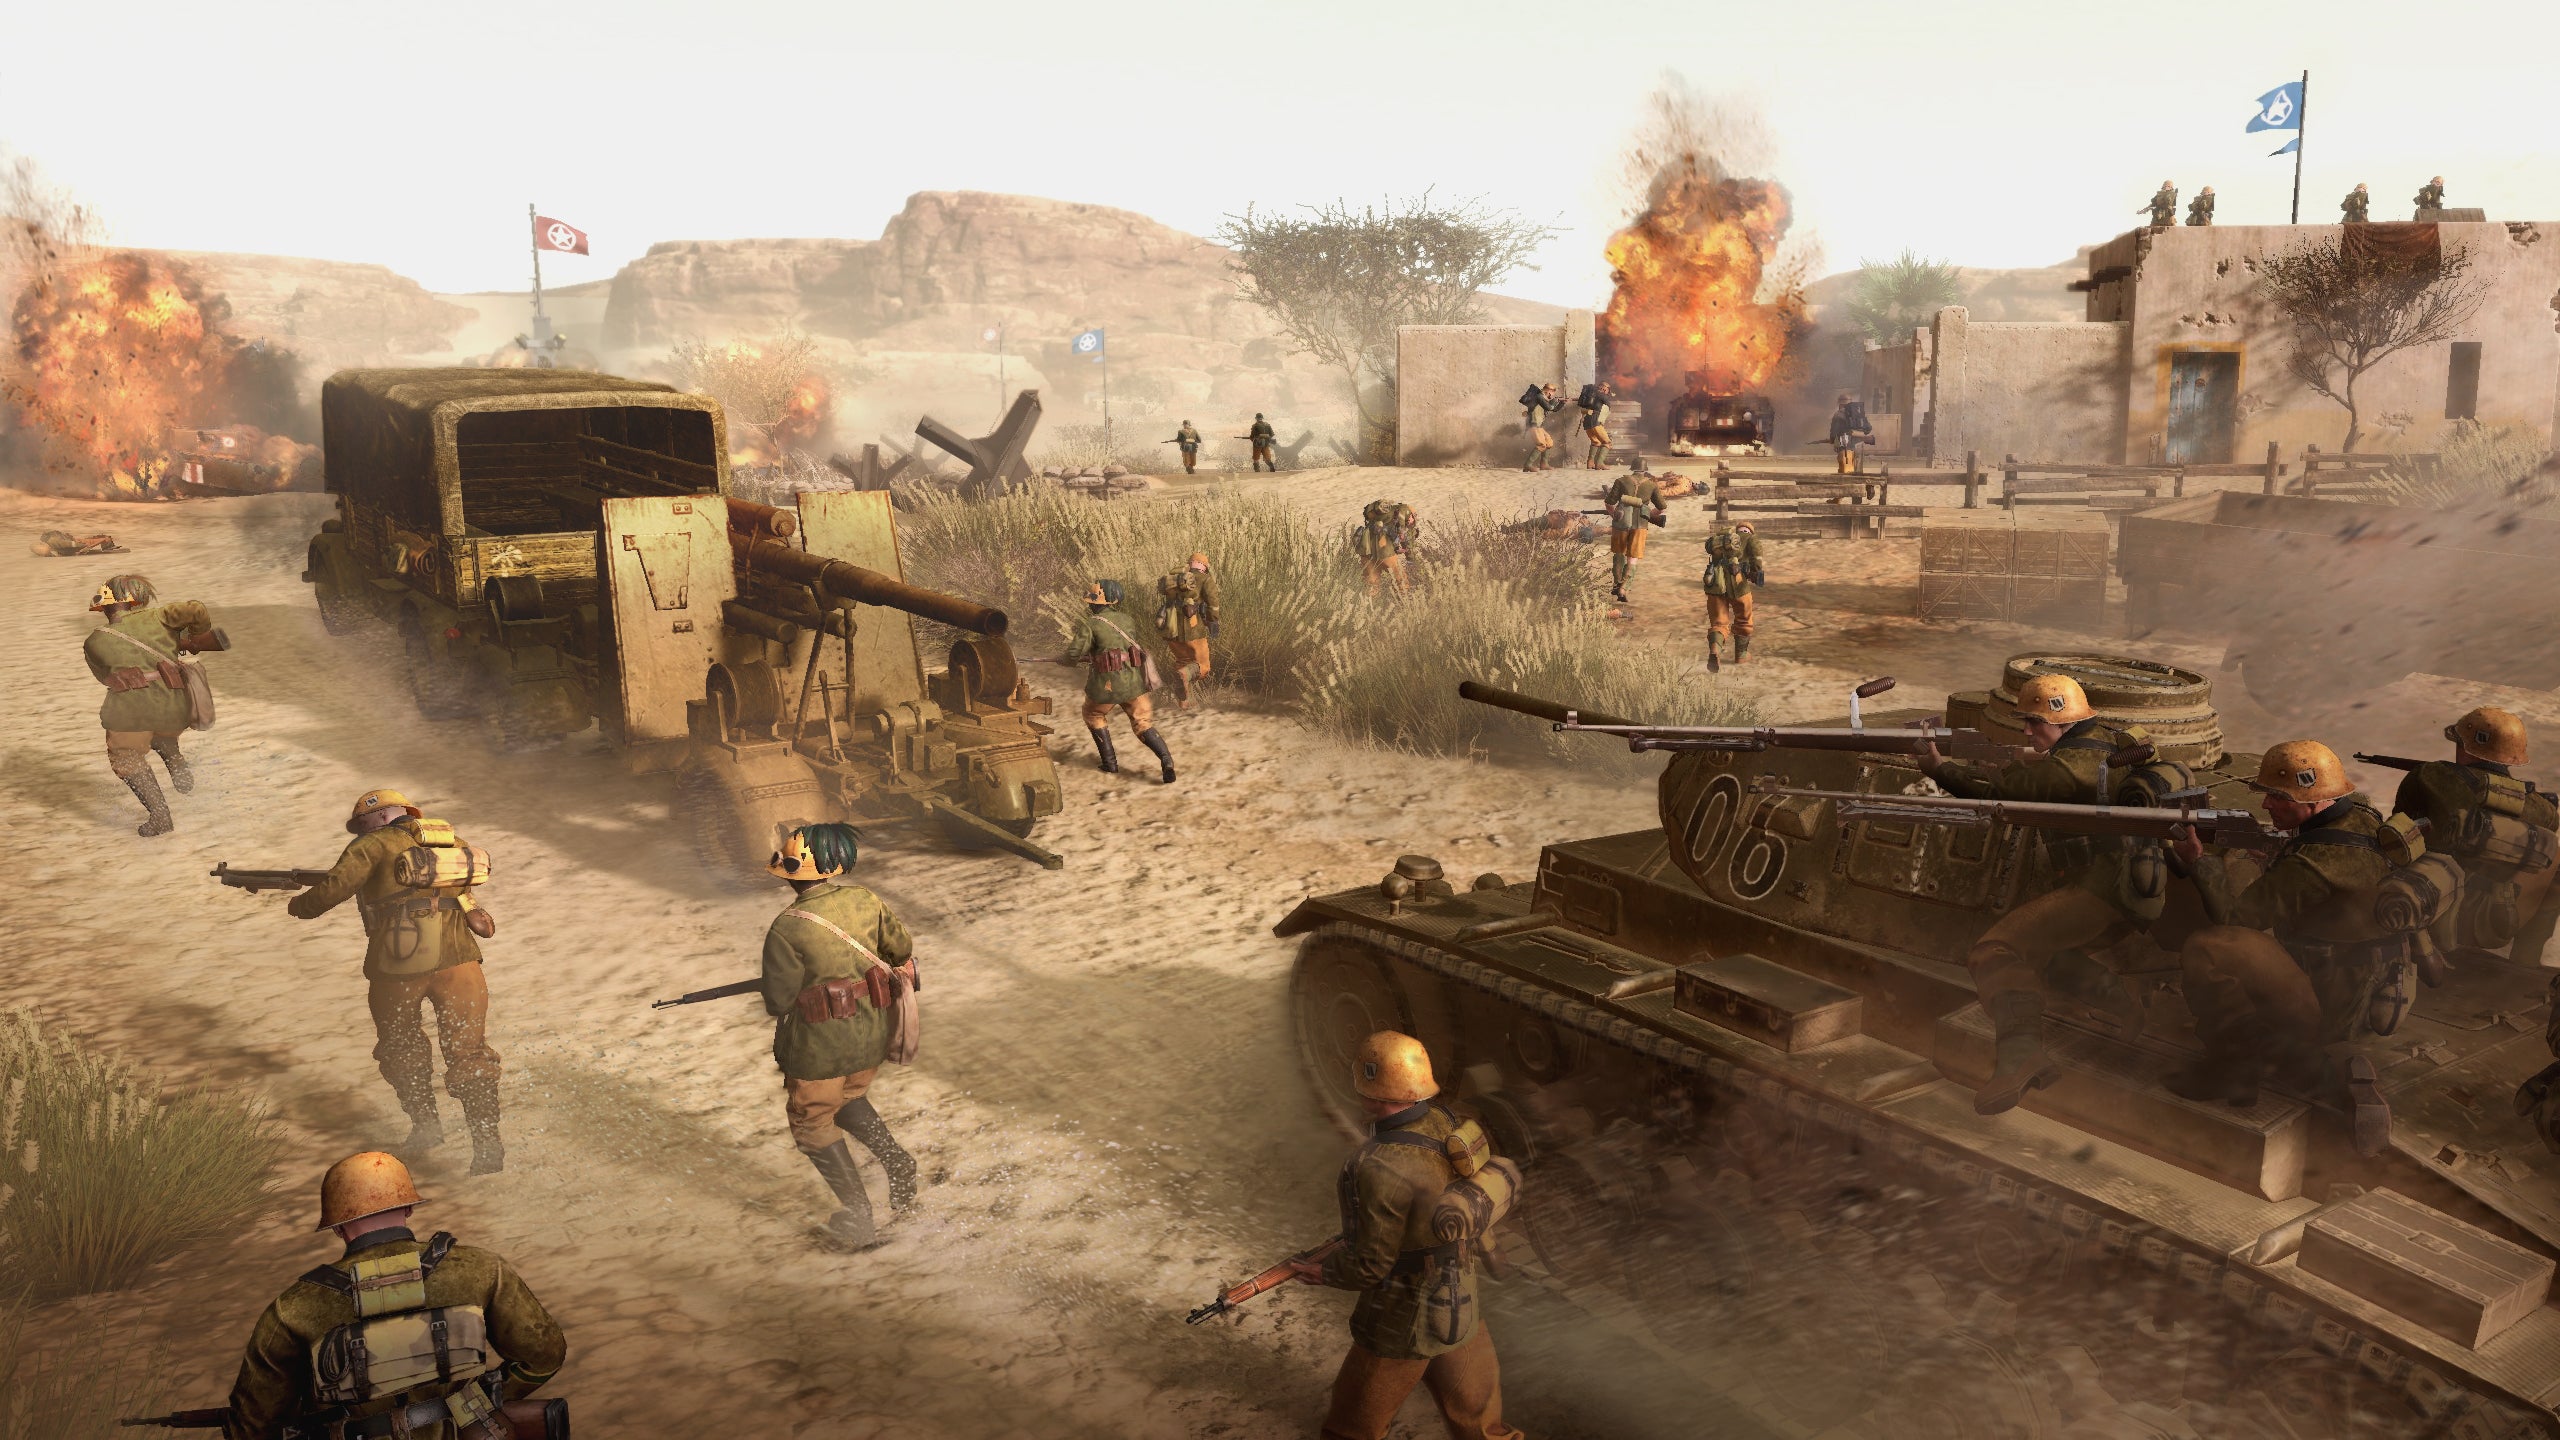 Company of Heroes 3 preview - a mounted infantry action plane riding a tank in Tunis